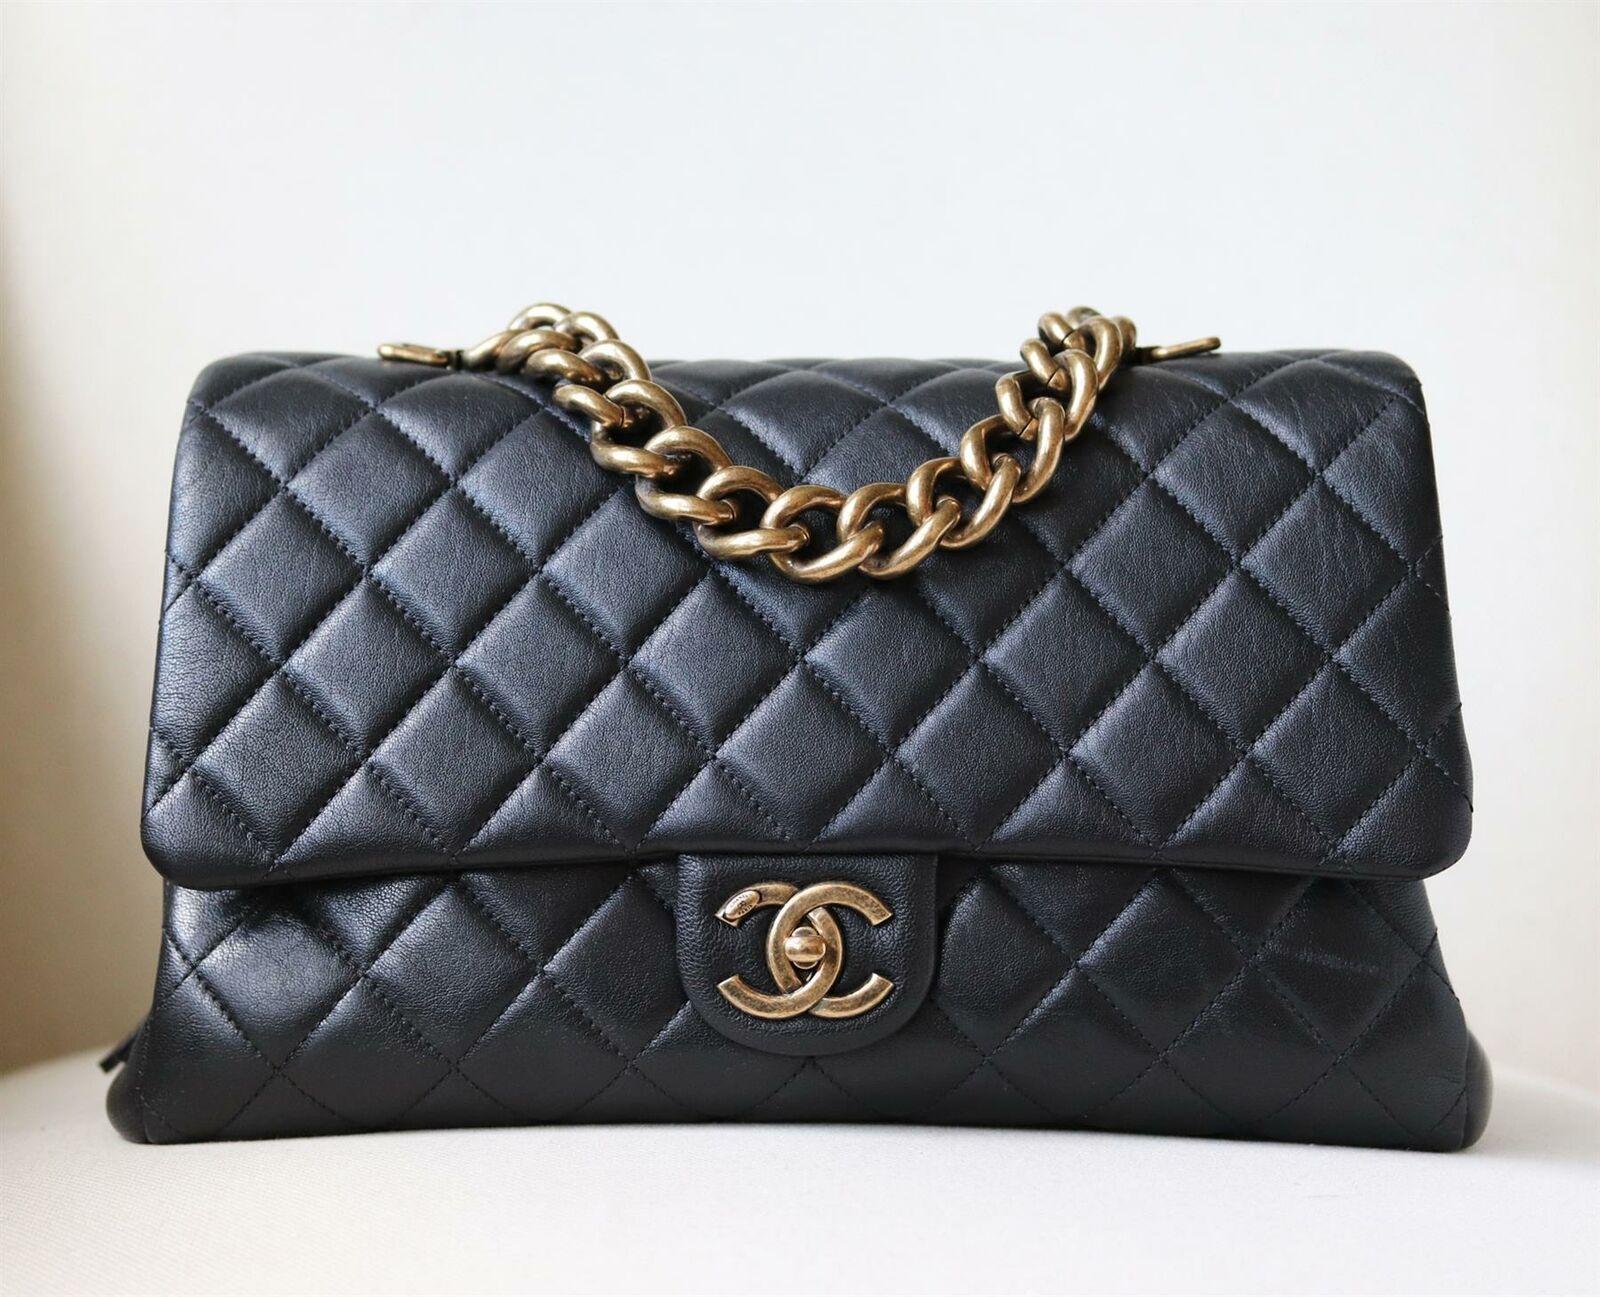 Chanel Quilted Leather Large Trapezio Flap Bag has been hand-finished by skilled artisans in the label's workshop.
Boasting a soft quilted leather exterior, this design is accented with an oversized gold-toned chain hand and black lambskin-leather